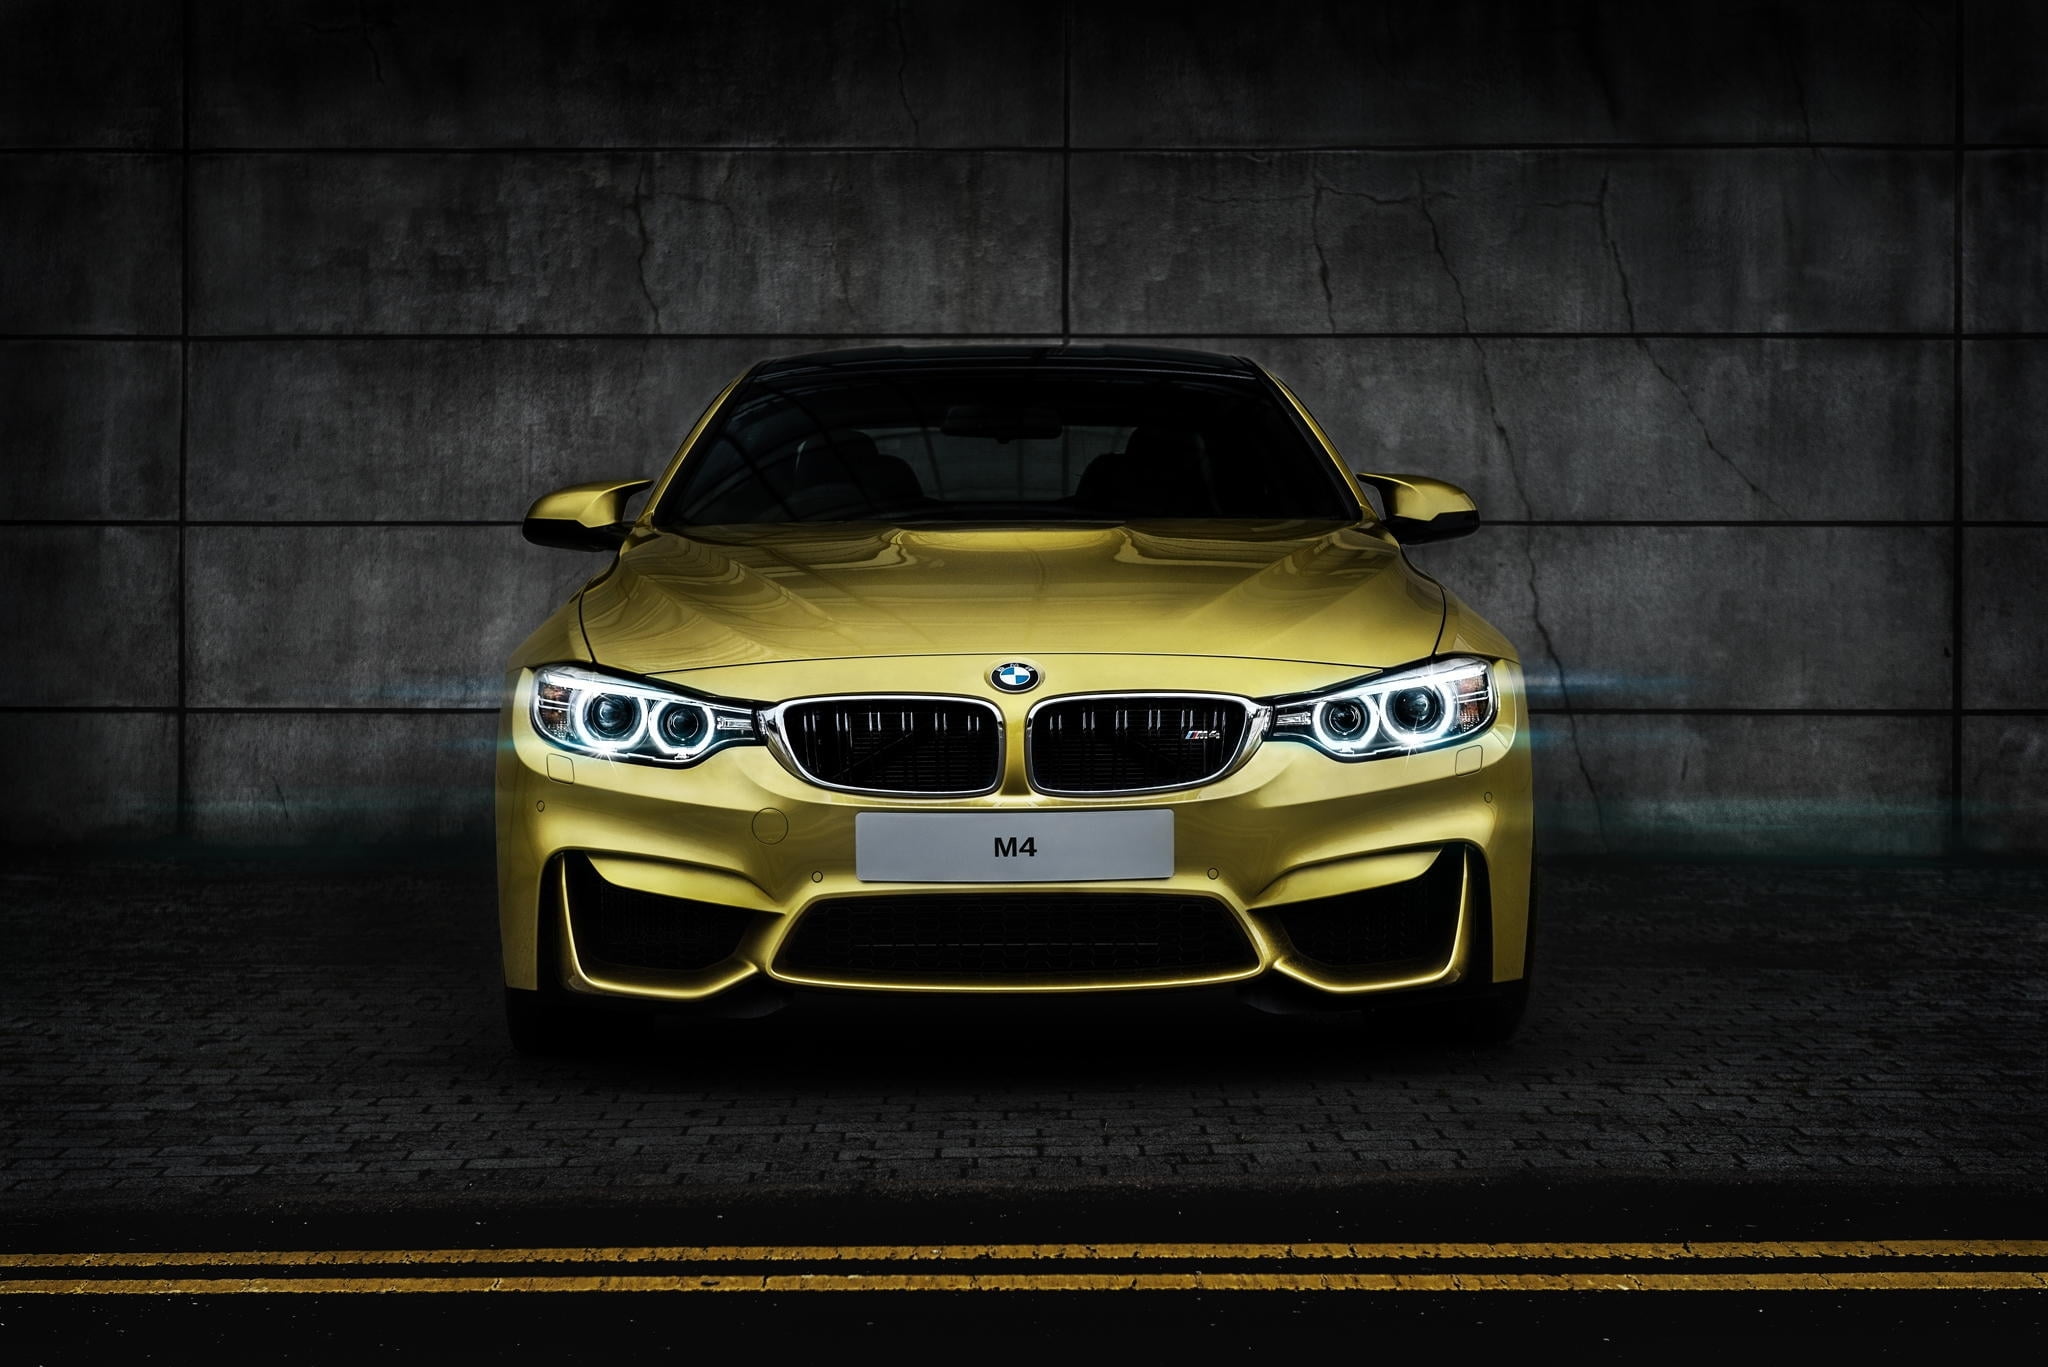 gold BMW car, yellow, Coupe, front, F82, Tomirri photography